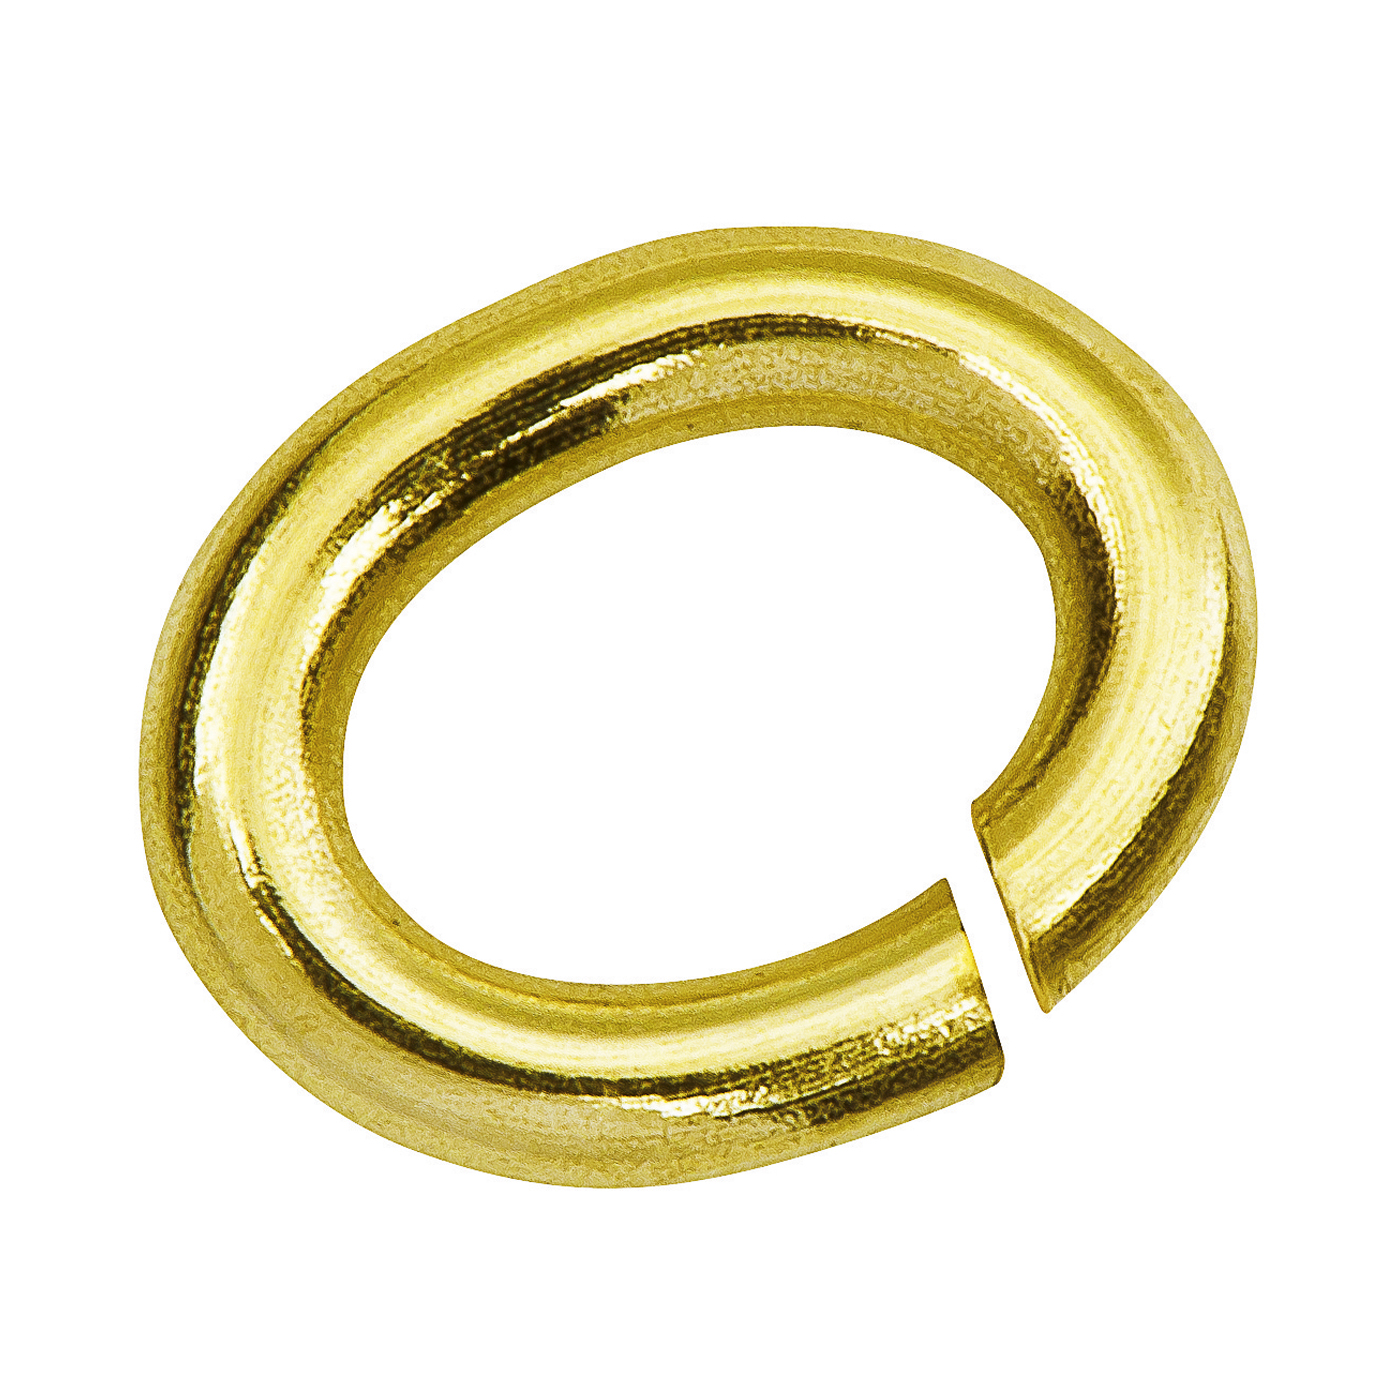 Binding Rings, oval, 750G, ø 6 mm - 2 pieces